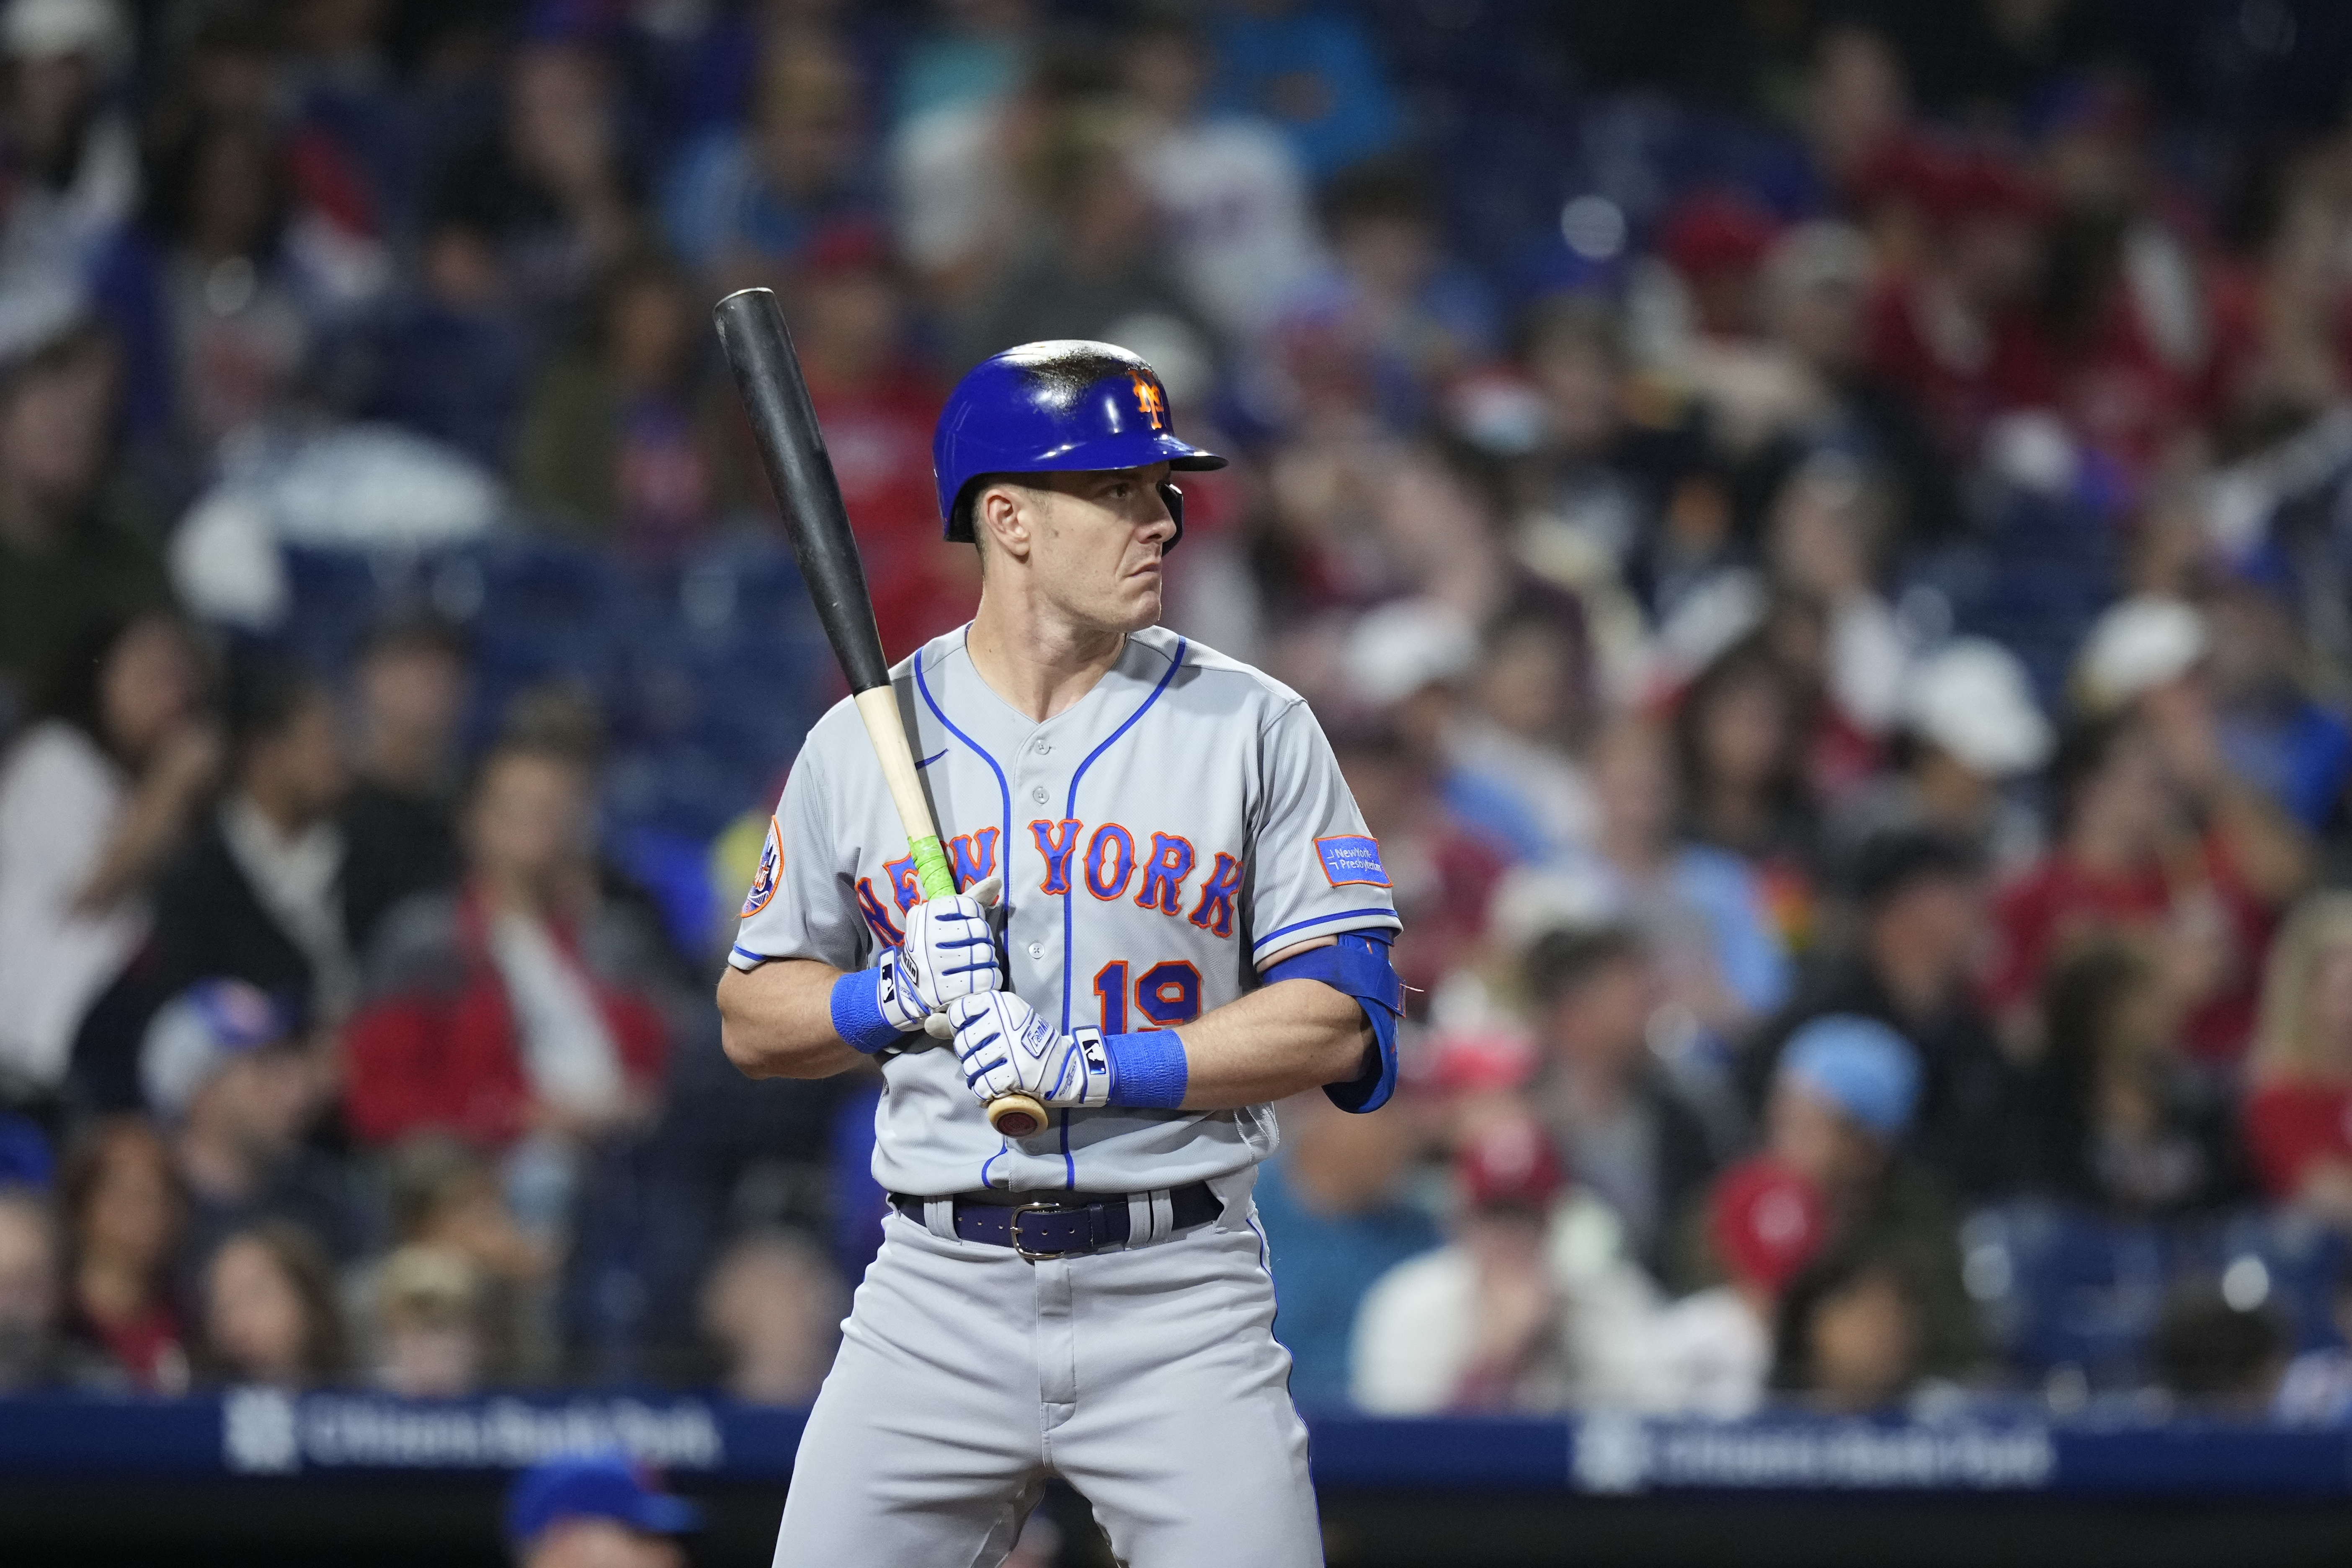 Alonso hits a 2-run homer as the Mets beat the Giants 8-4 for their 1st  series win in a month